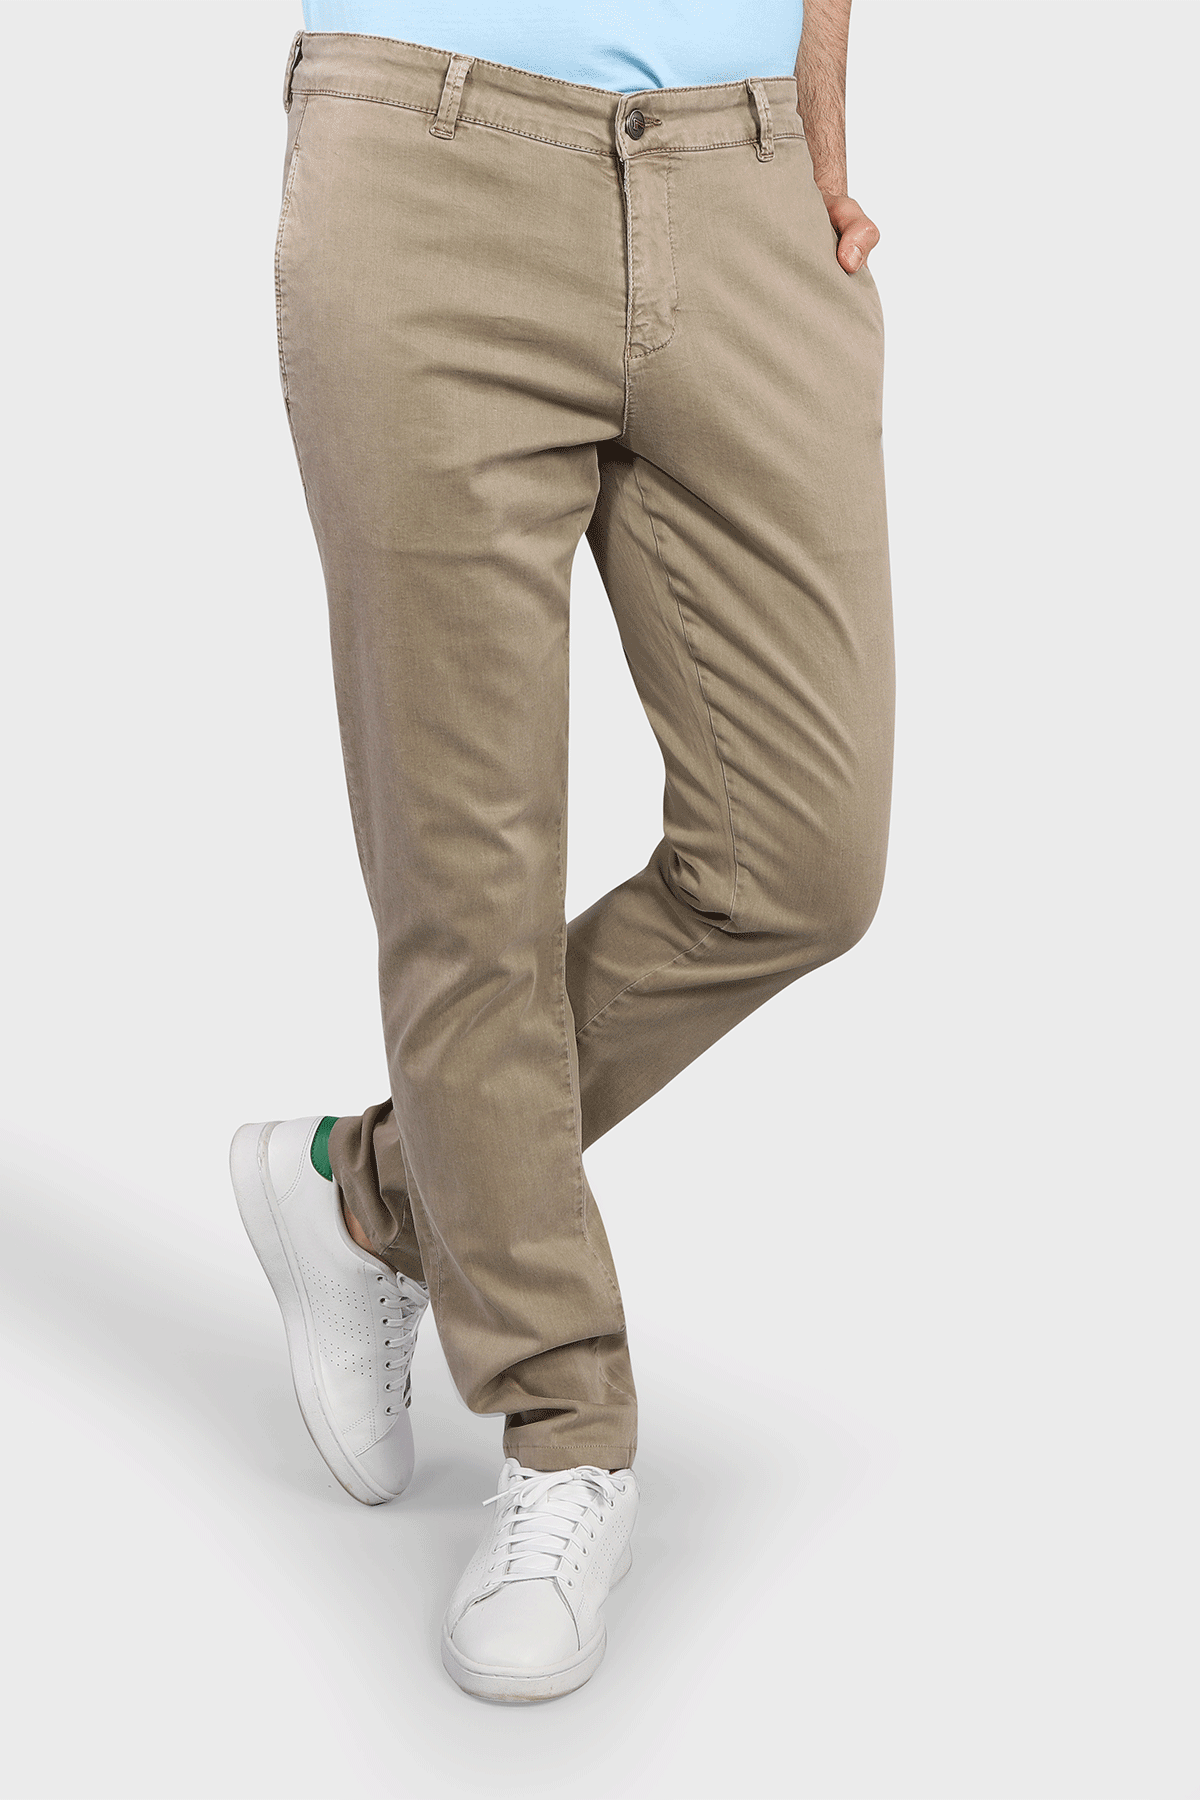 Flat Front Stretch Pants in Oatmeal - 7 Downie St.®